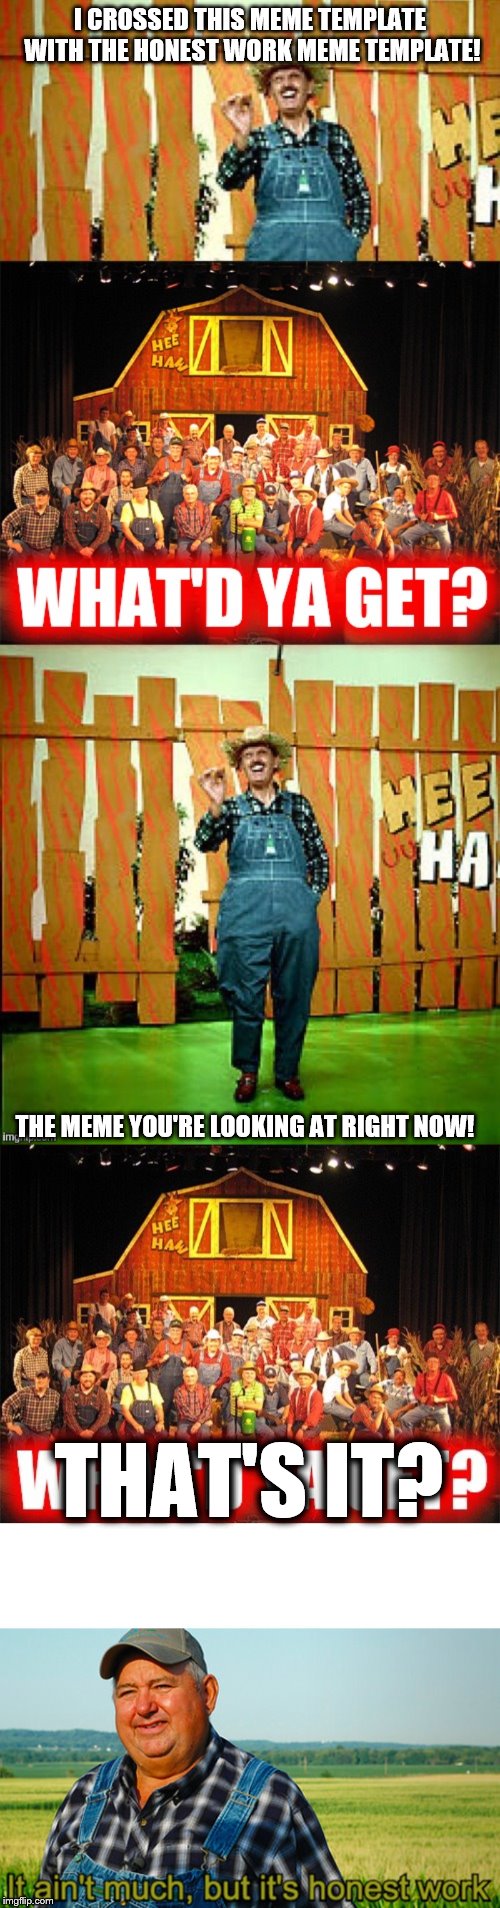  I CROSSED THIS MEME TEMPLATE WITH THE HONEST WORK MEME TEMPLATE! THE MEME YOU'RE LOOKING AT RIGHT NOW! THAT'S IT? | image tagged in hee haw i crossed a x with an x,it aint much but honest work | made w/ Imgflip meme maker